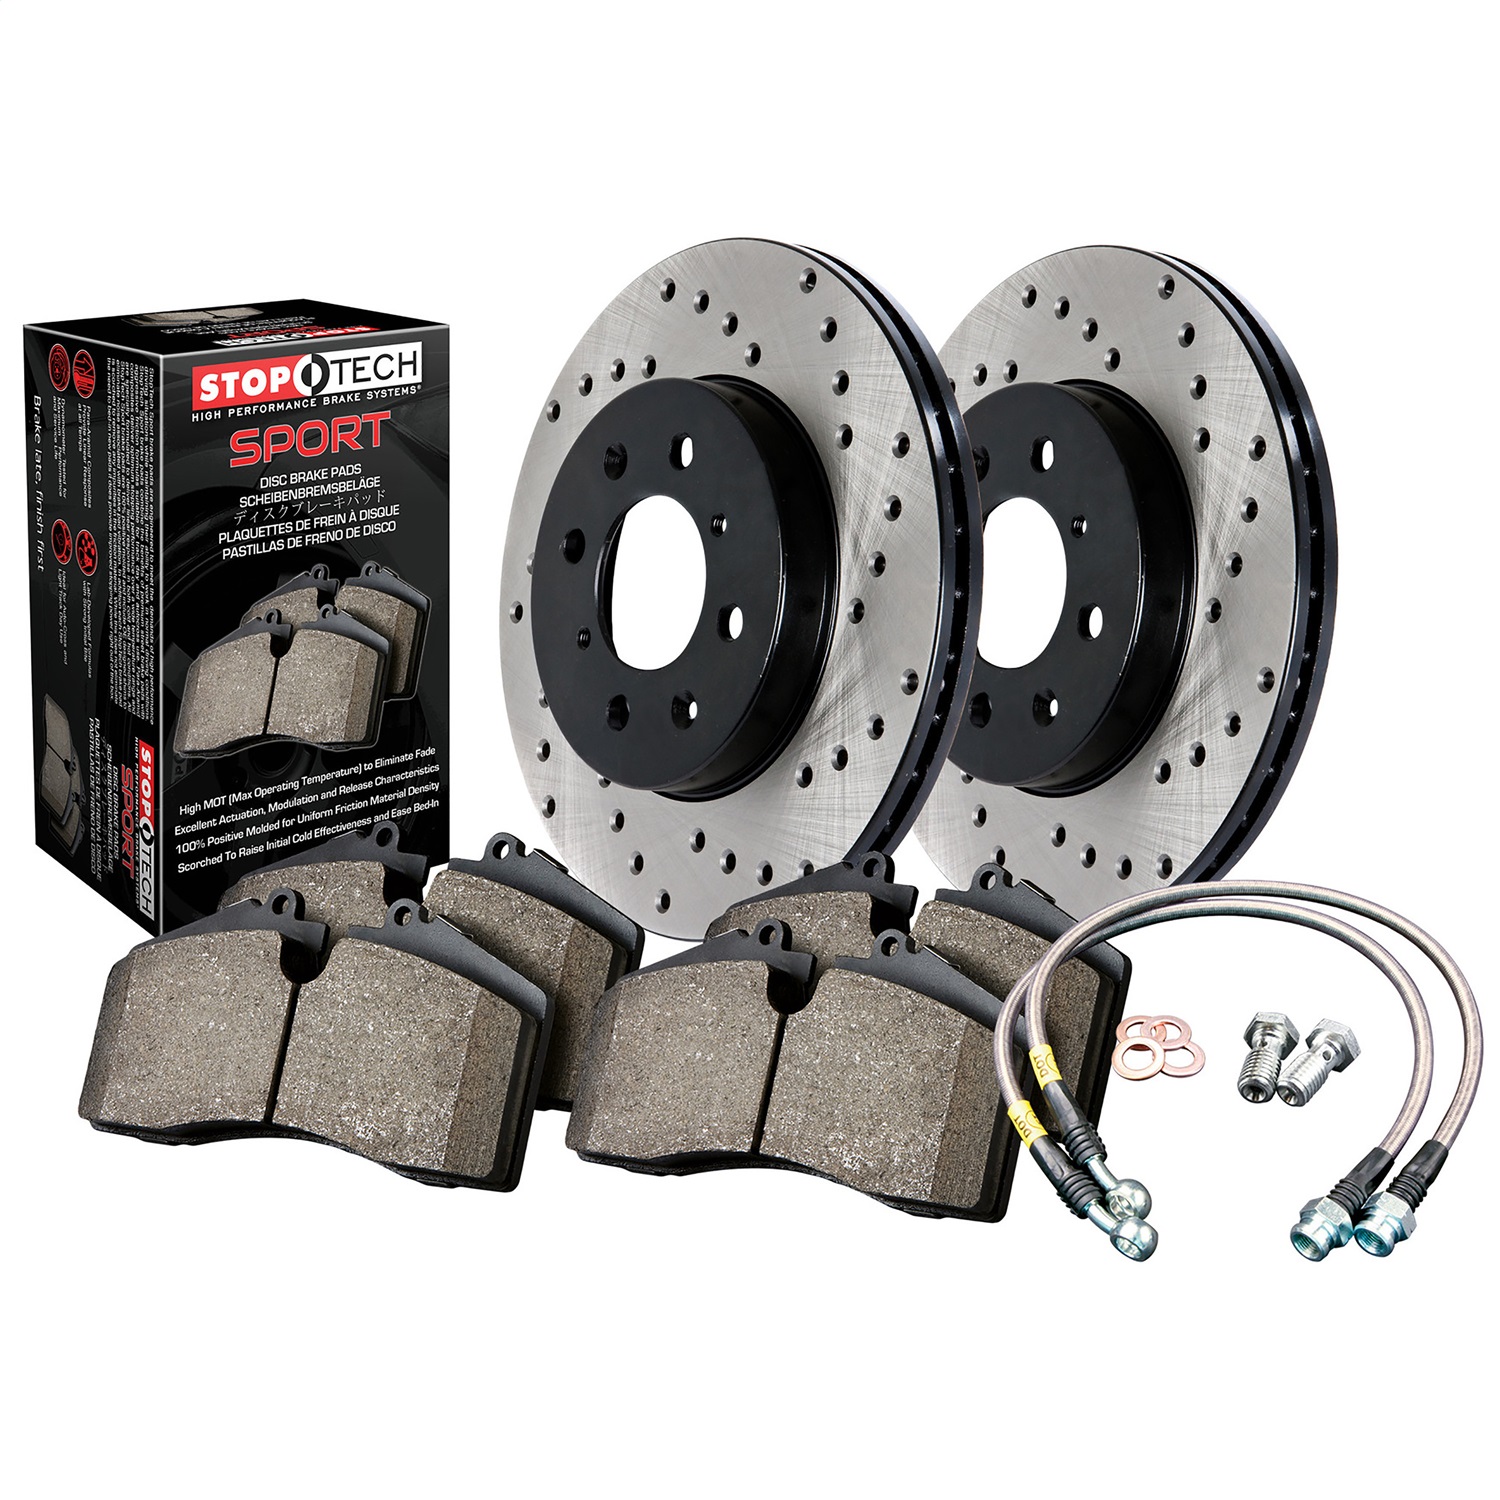 StopTech 979.40005F Sport Disc Brake Kit w/Cross-Drilled Rotor Fits Civic EL